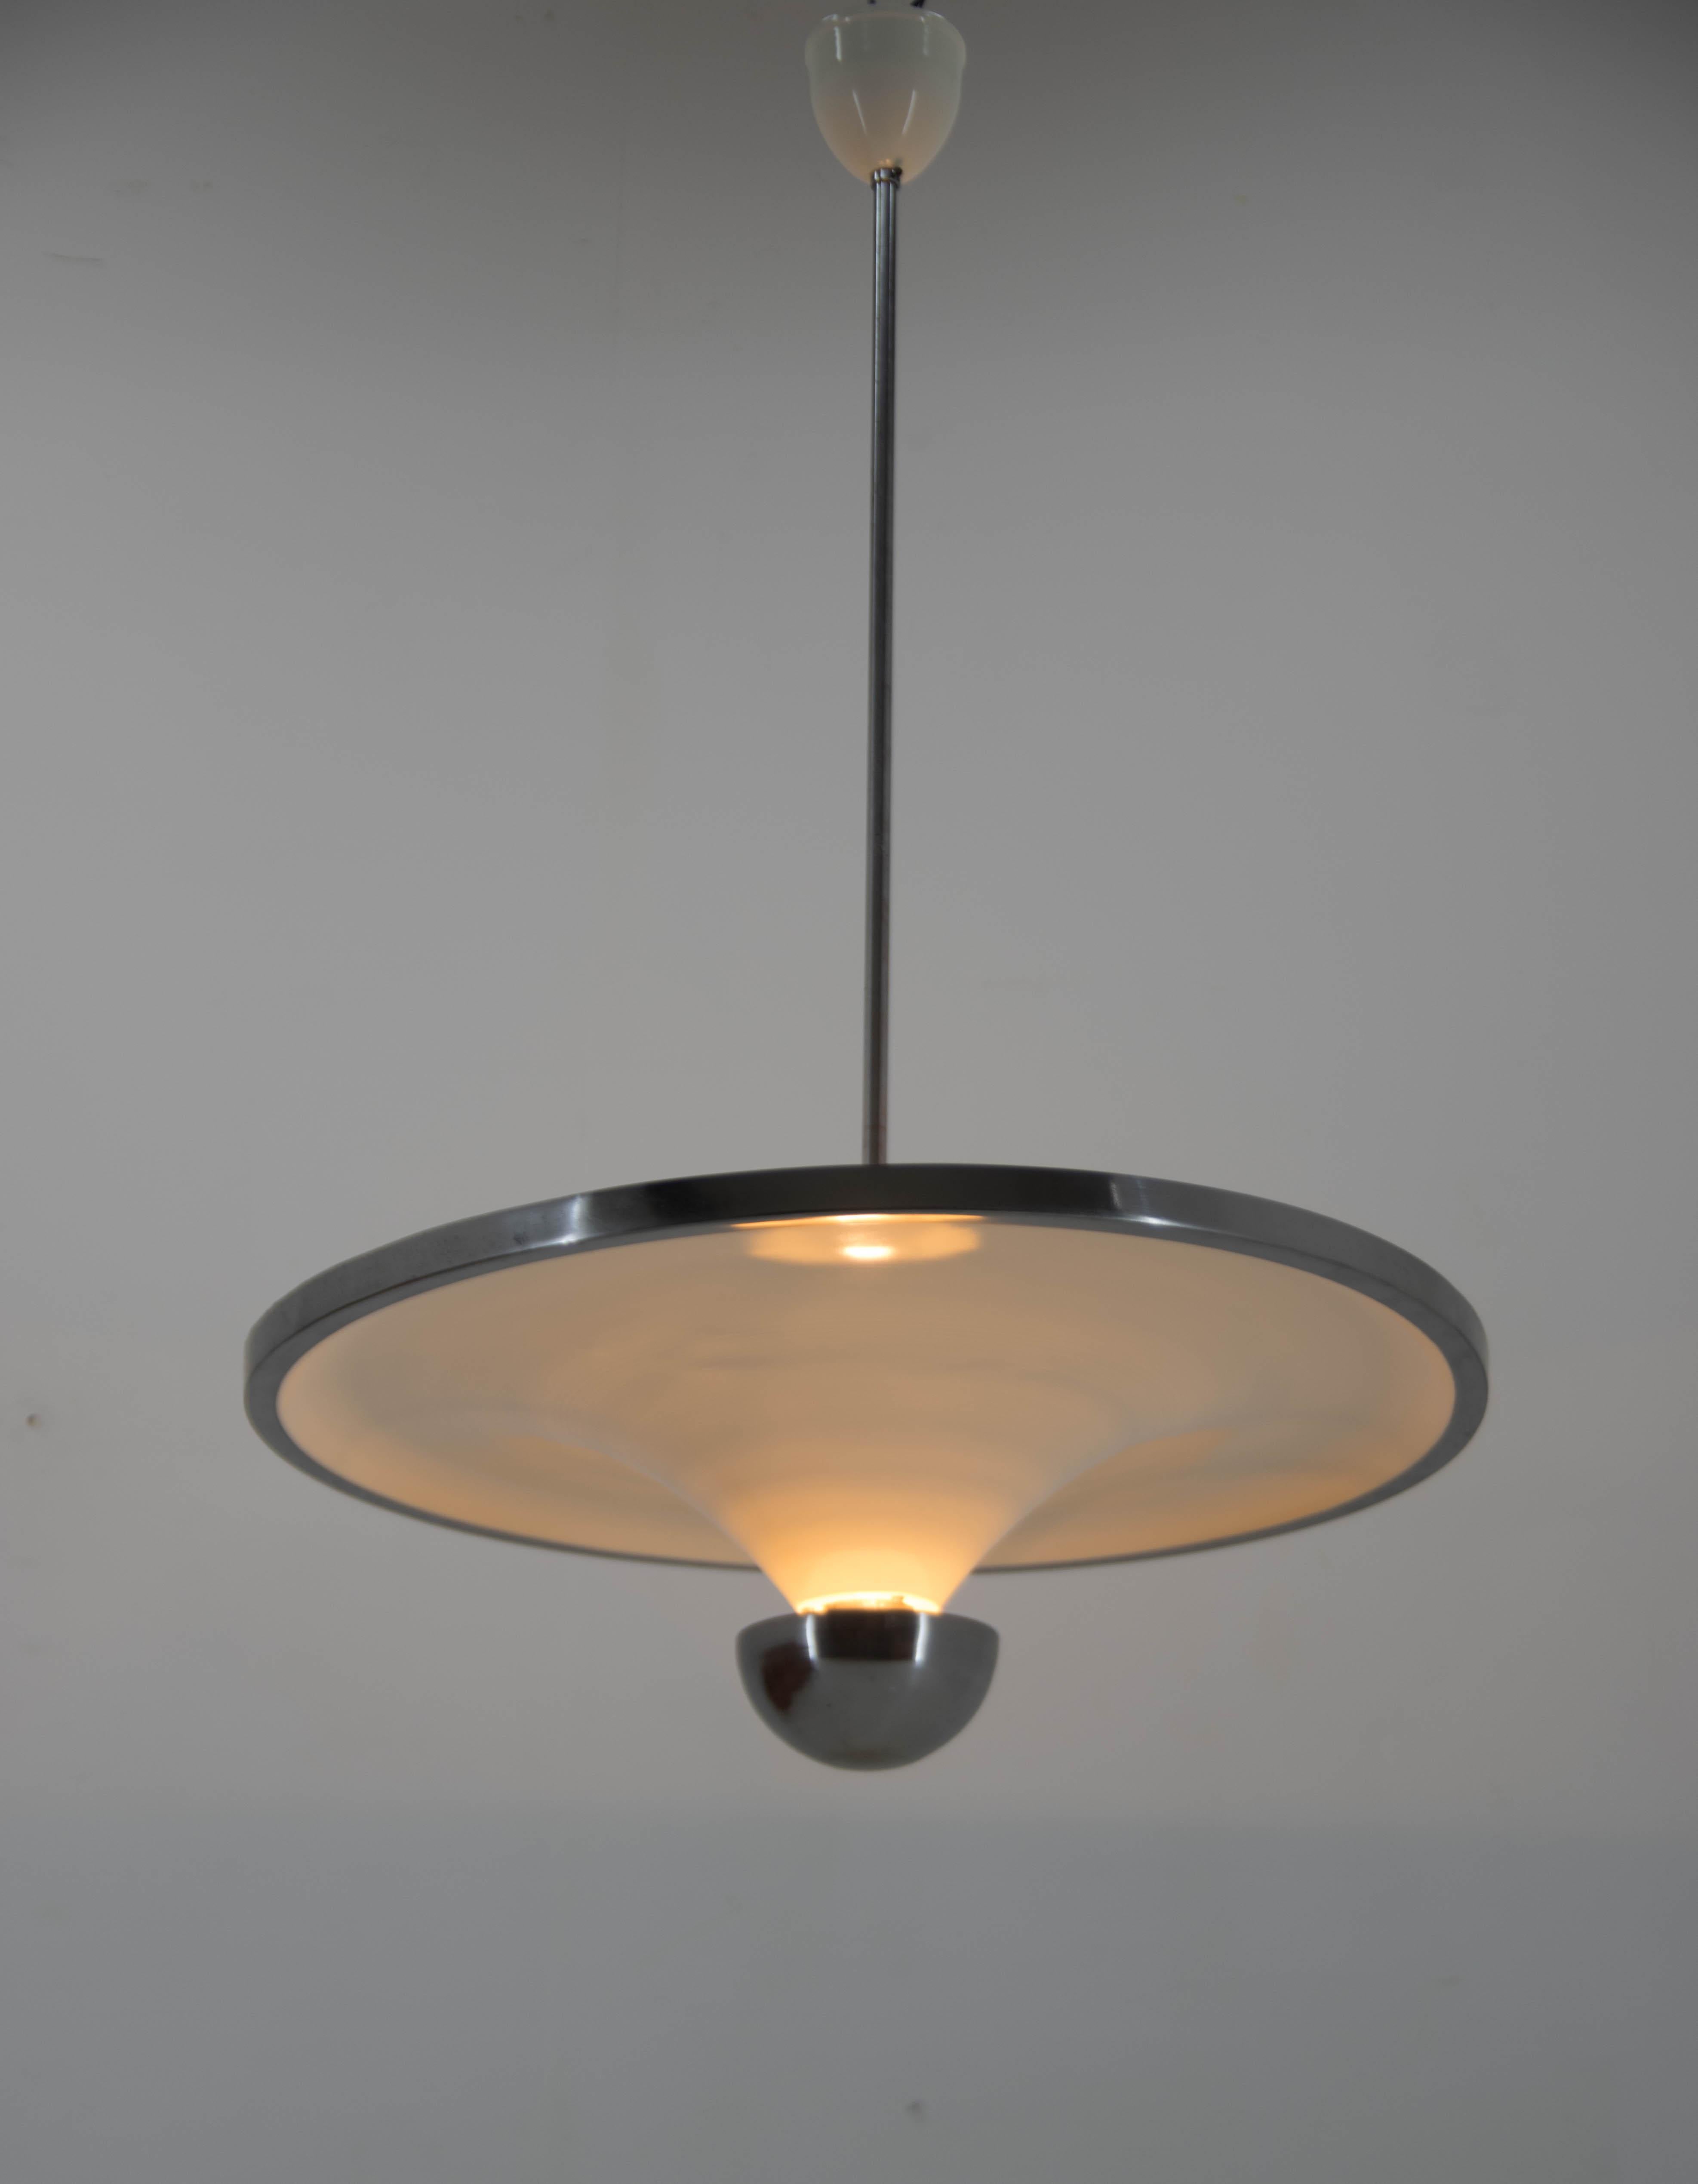 Beautiful simple and elegant chandelier with indirect light and adjustable lower bulb designed by Franta Anyz and executed by IAS in 1920s. 
Carefully restored: 
new ivory color paint
rewired: two separate circuits - 3x60W on upper side
1x100W on